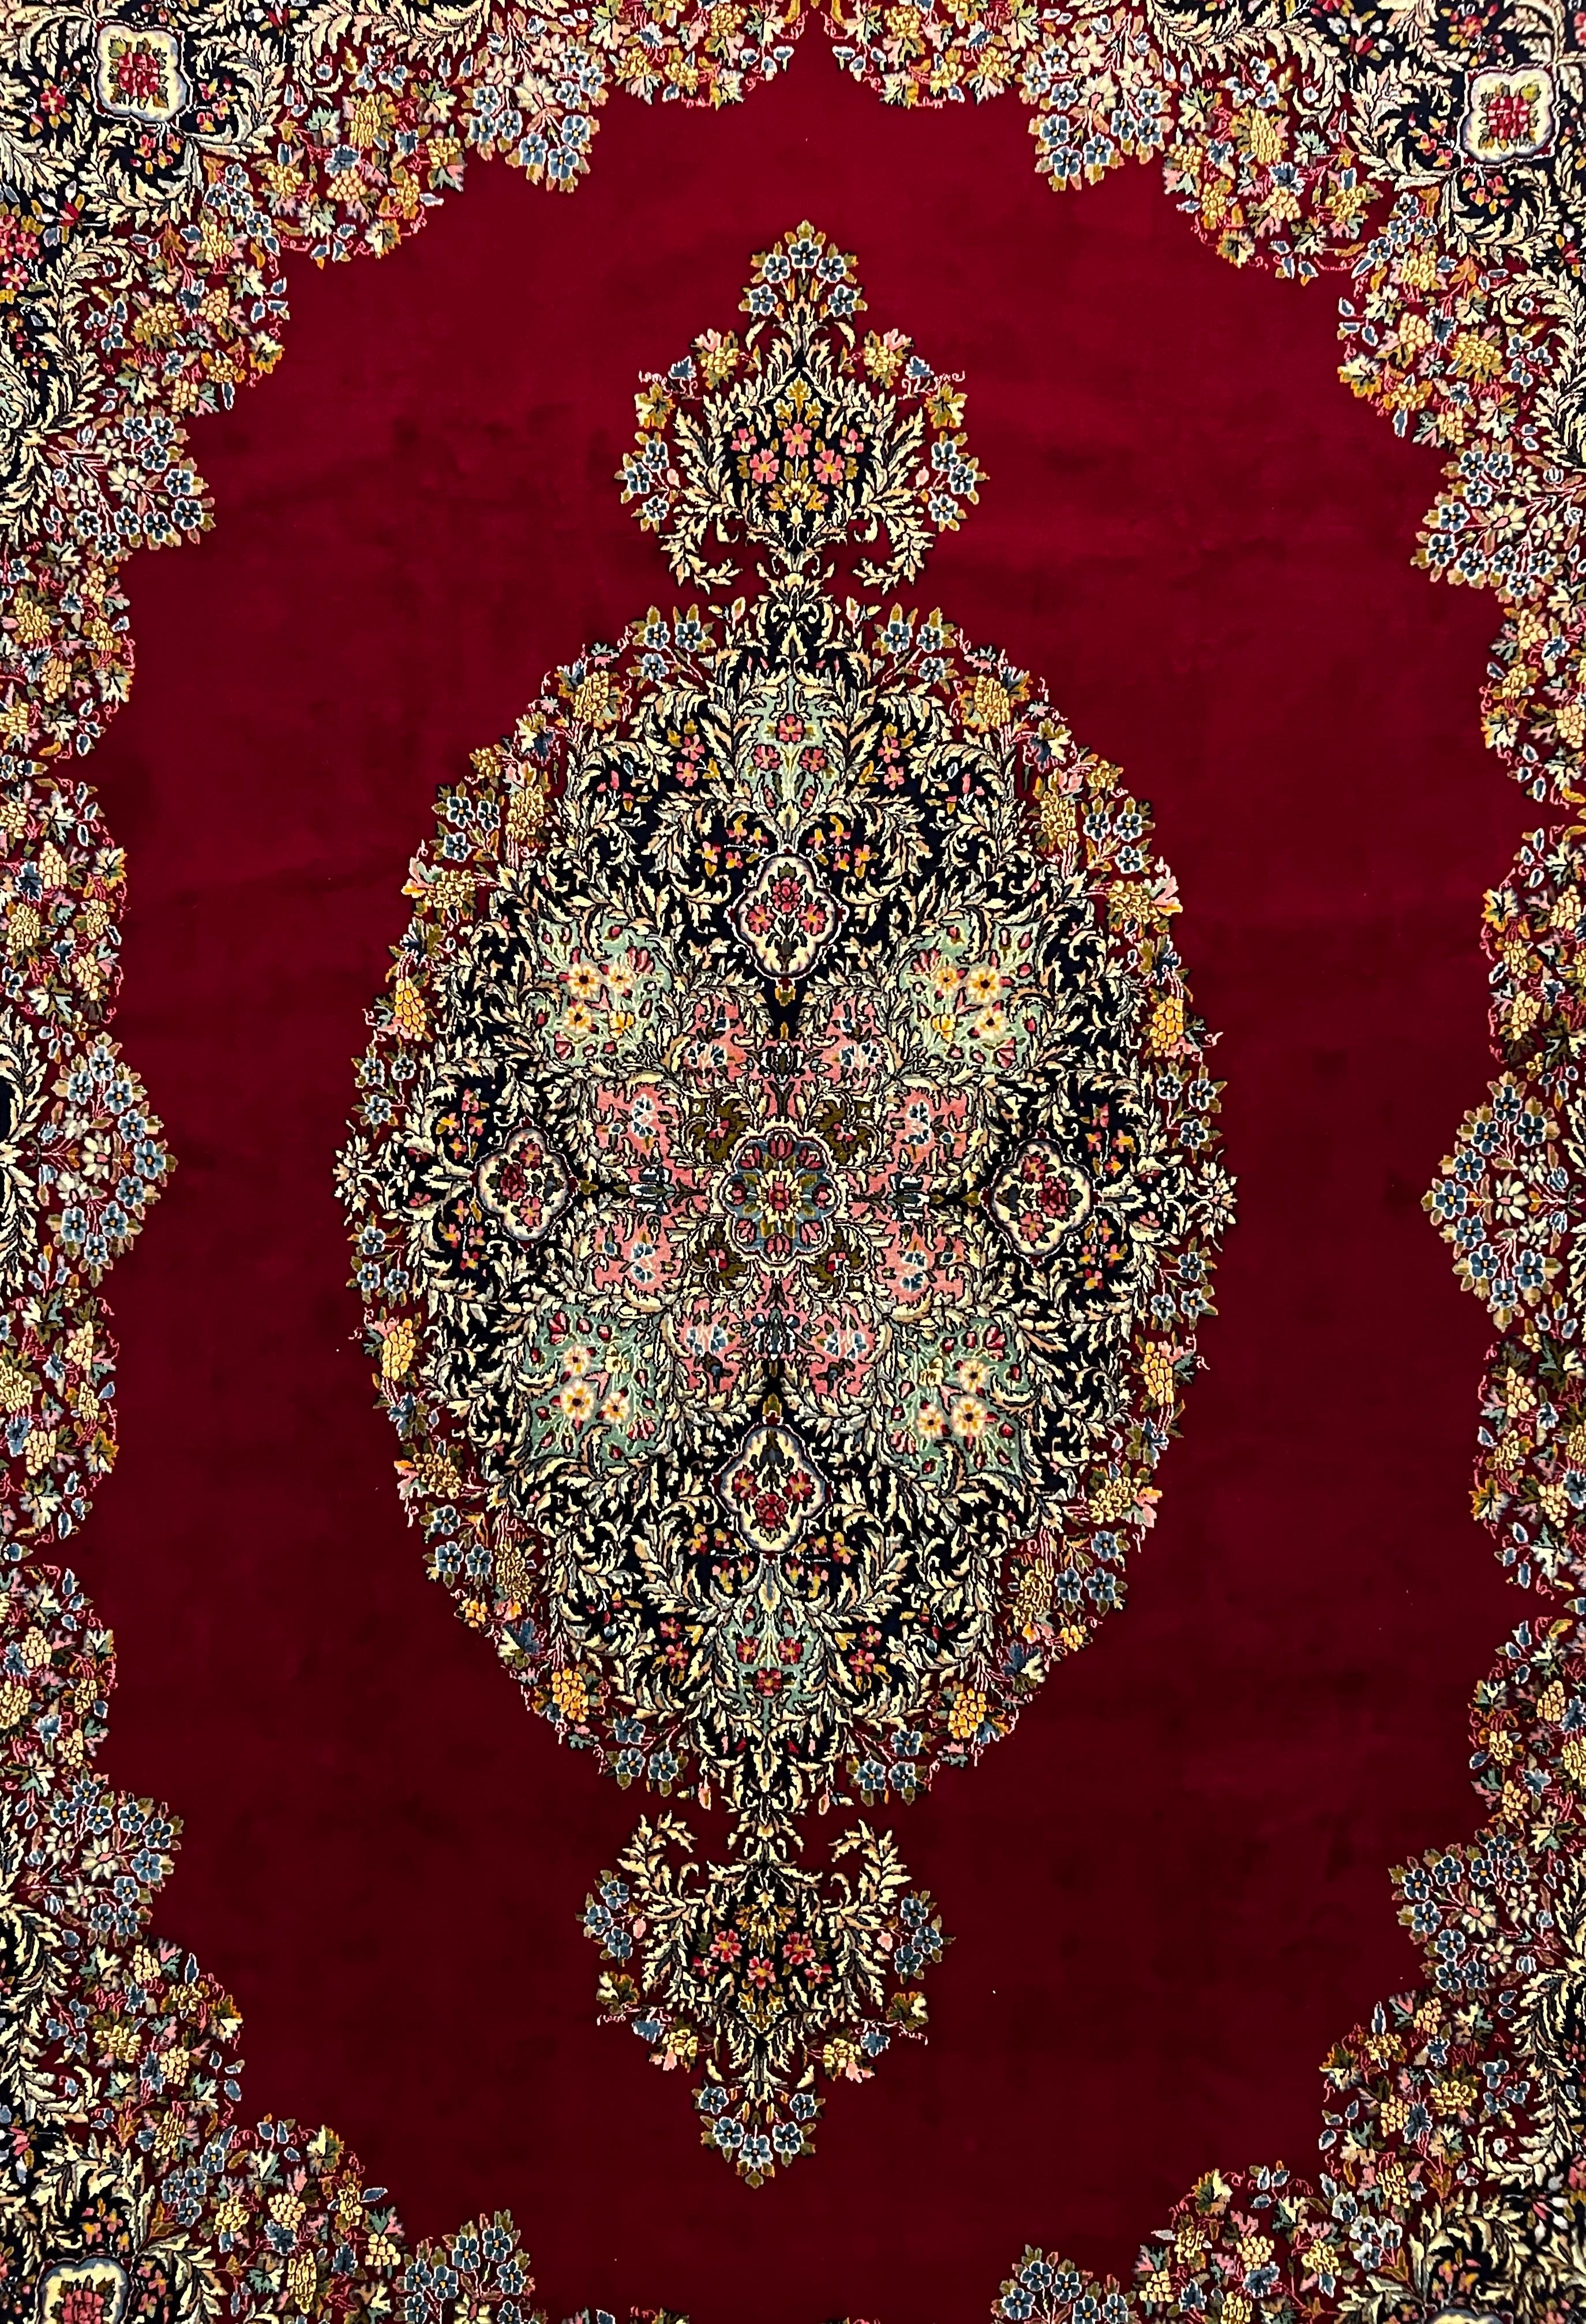  A luxurious and large  Kerman Lavar rug—a masterpiece meticulously hand-knotted with the finest blend of wool and cotton. Made in 1950's,  the high-pile craftsmanship lends a sumptuous feel, while the vibrant red color palette captures attention